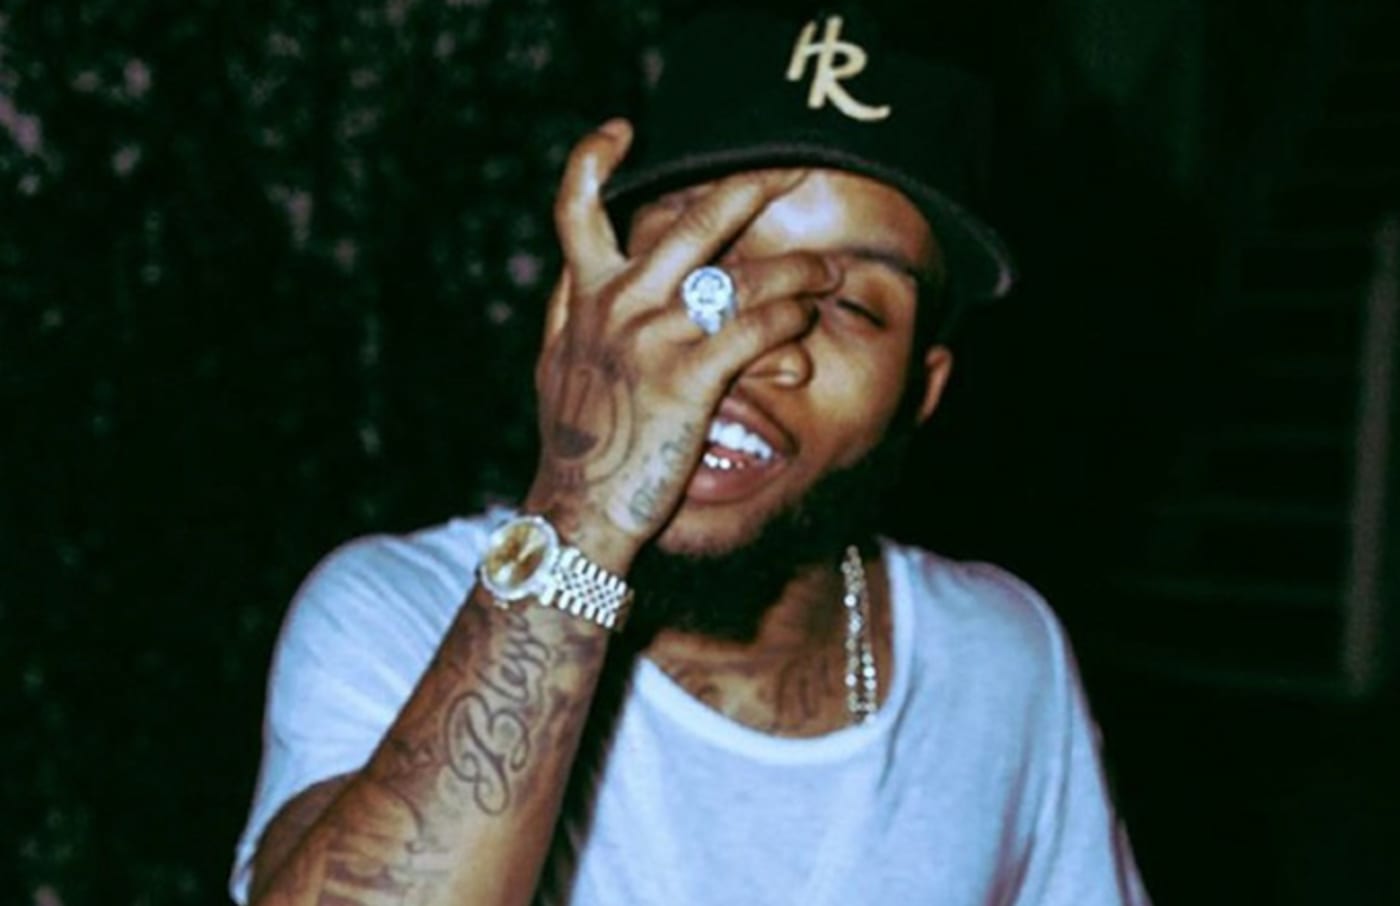 Tory Lanez posing with hands in front of face